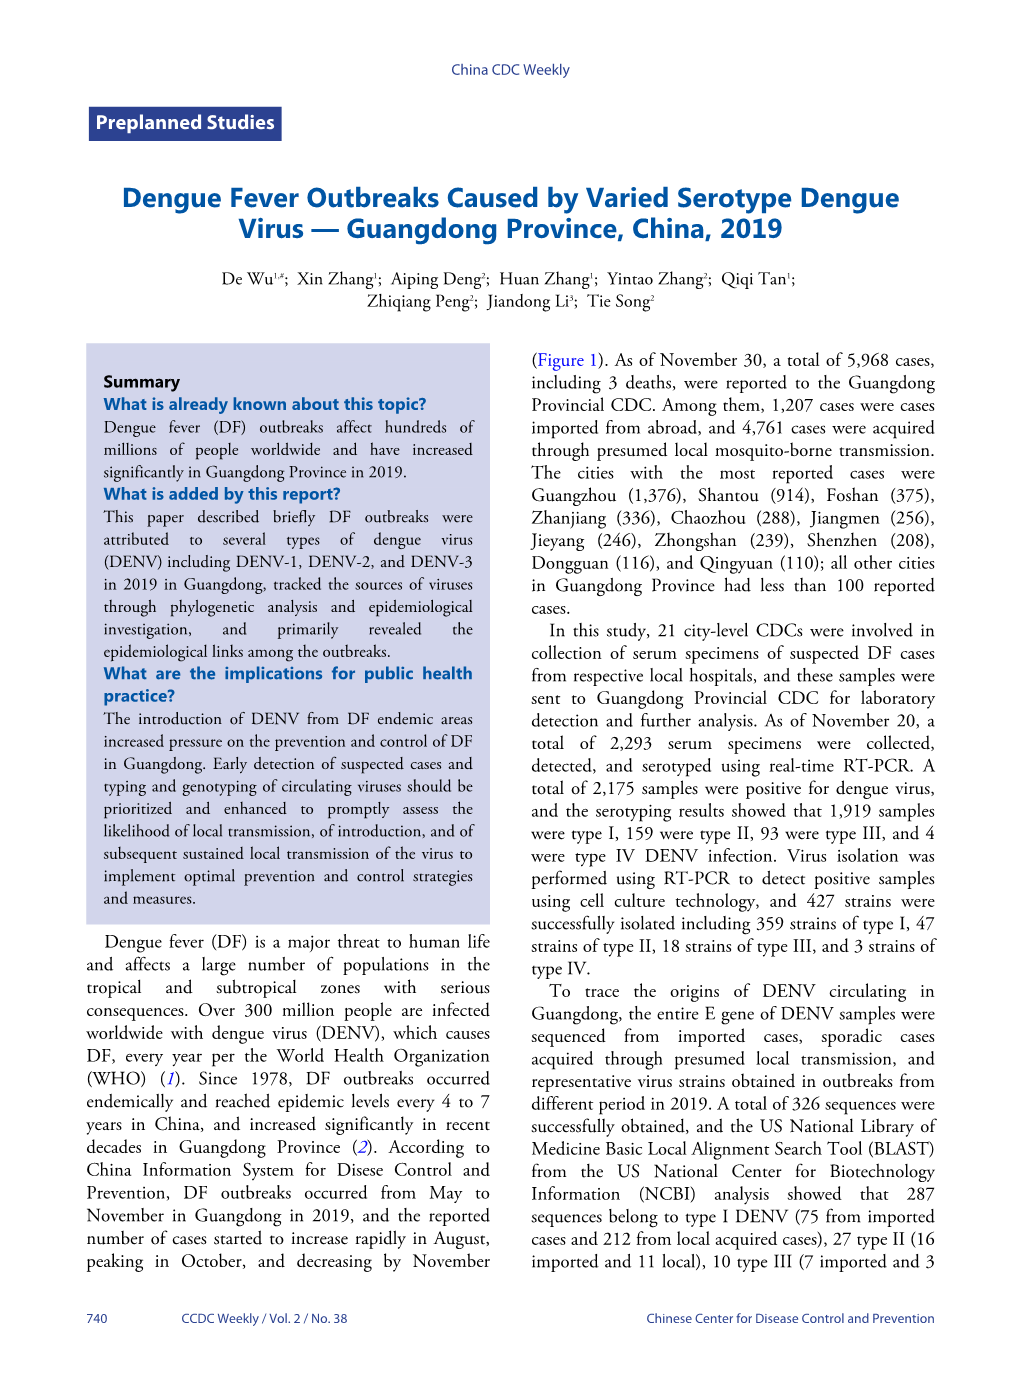 Dengue Fever Outbreaks Caused by Varied Serotype Dengue Virus — Guangdong Province, China, 2019